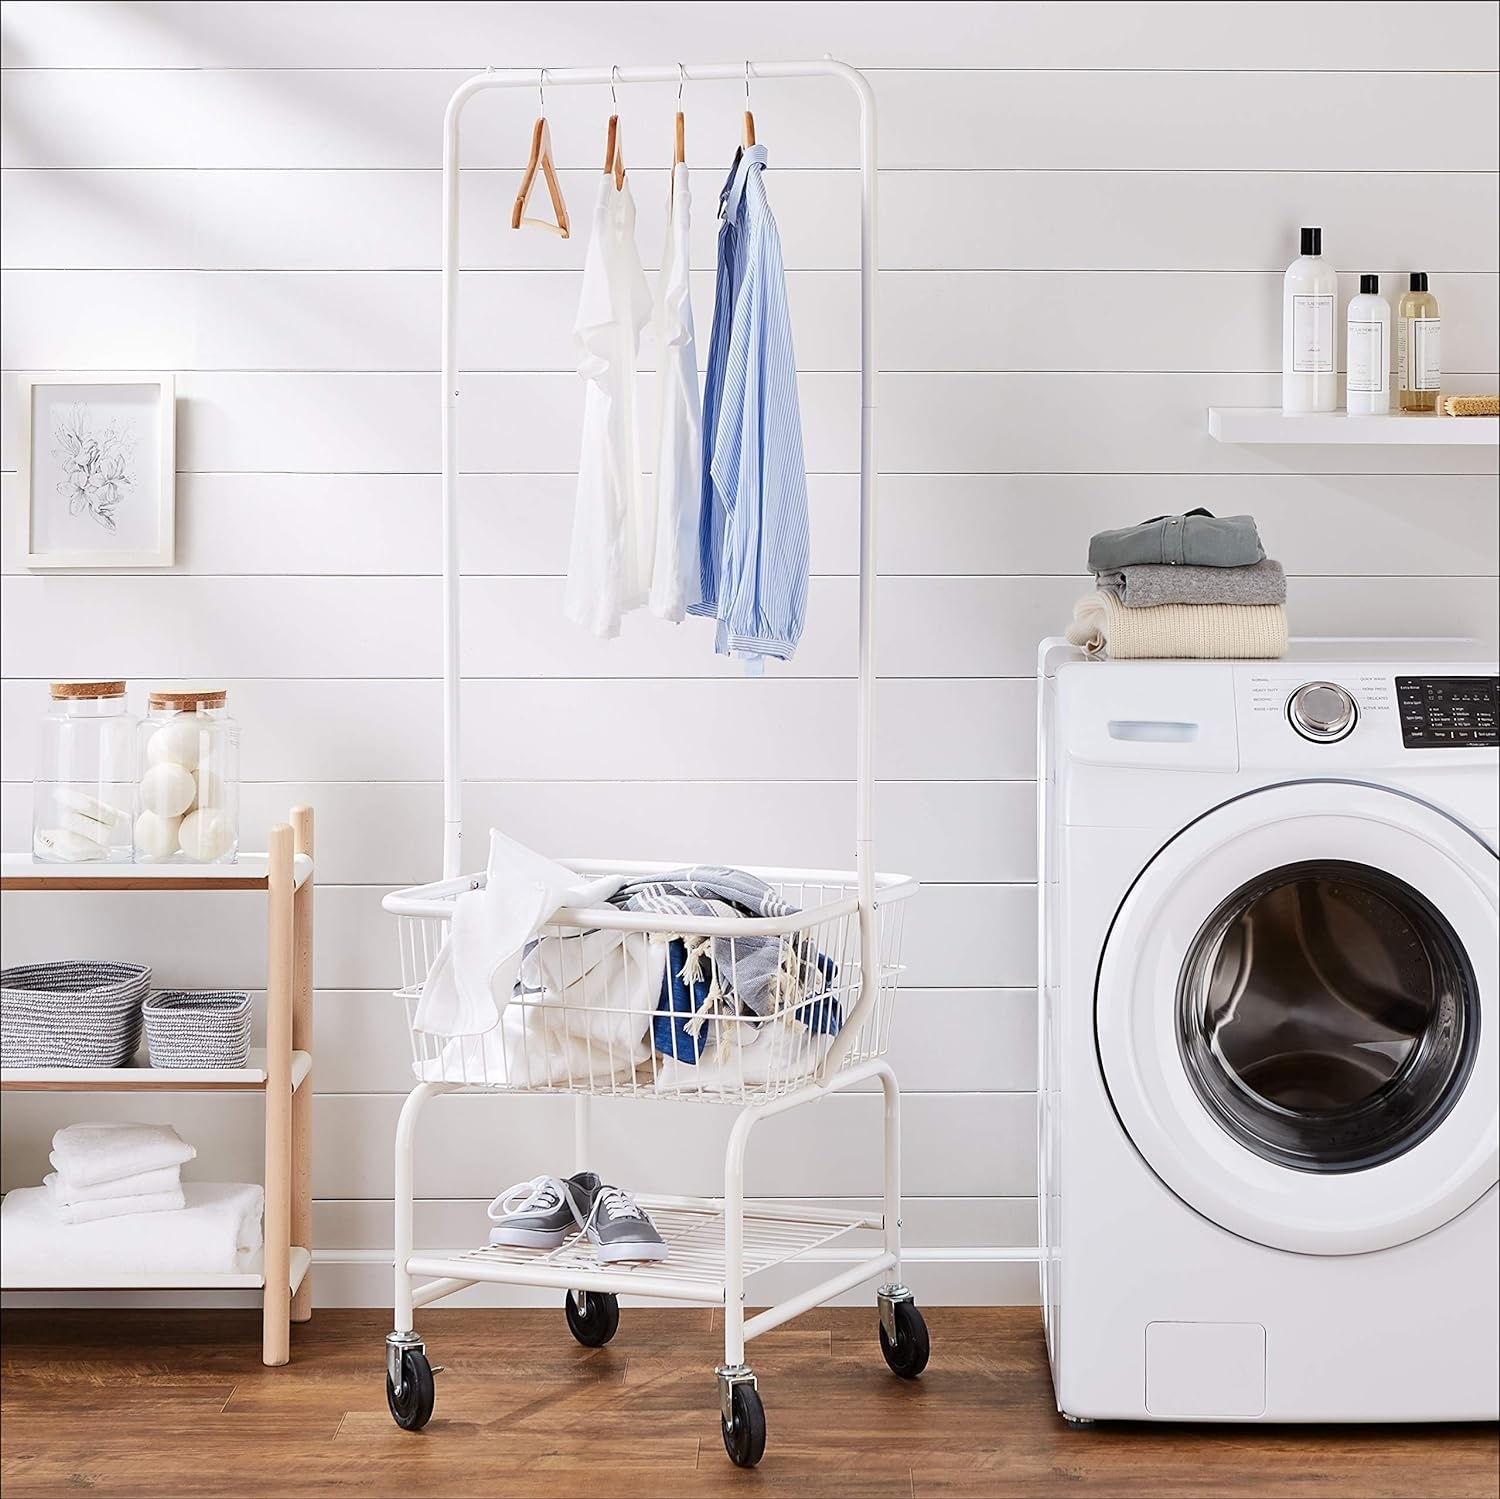 The white laundry basket on wheels with the hanging rack attached on top